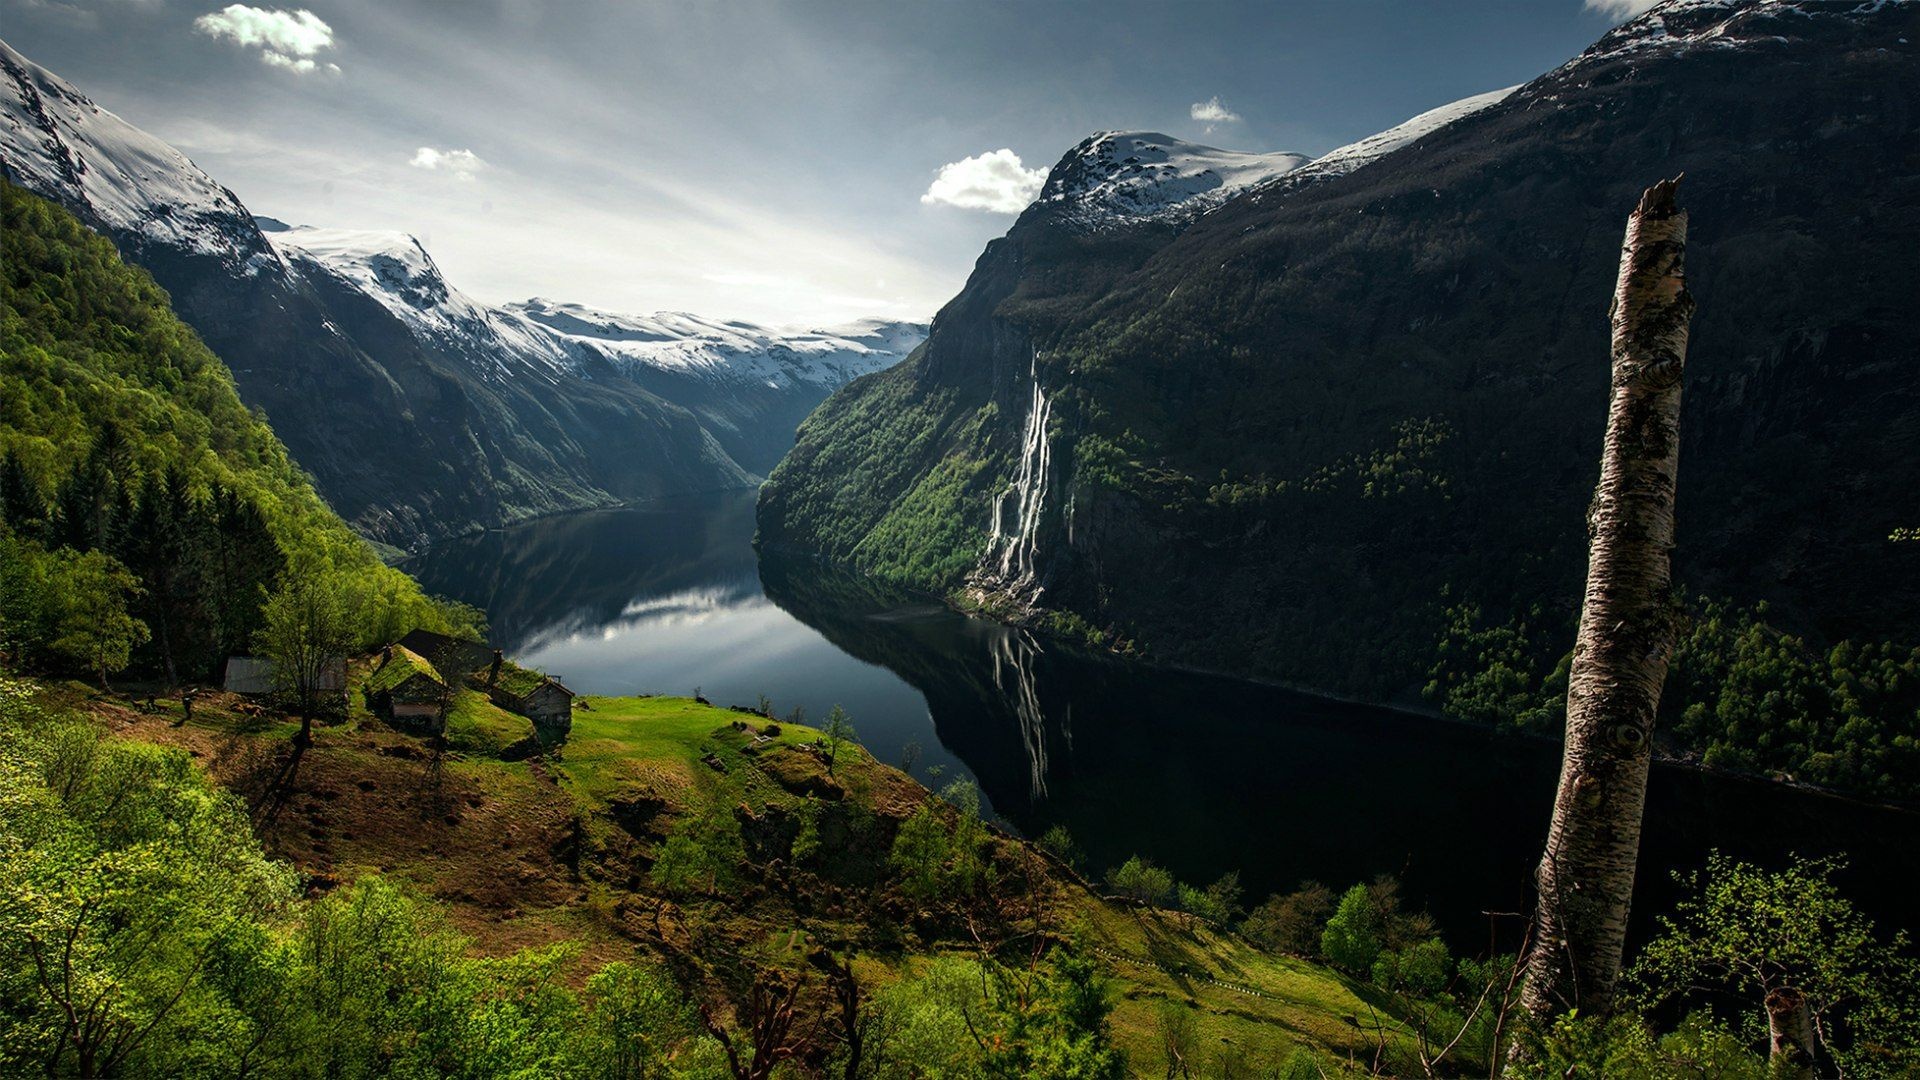 Fjords of Norway, Captivating landscapes, Picture-perfect scenery, Nature's splendor, 1920x1080 Full HD Desktop